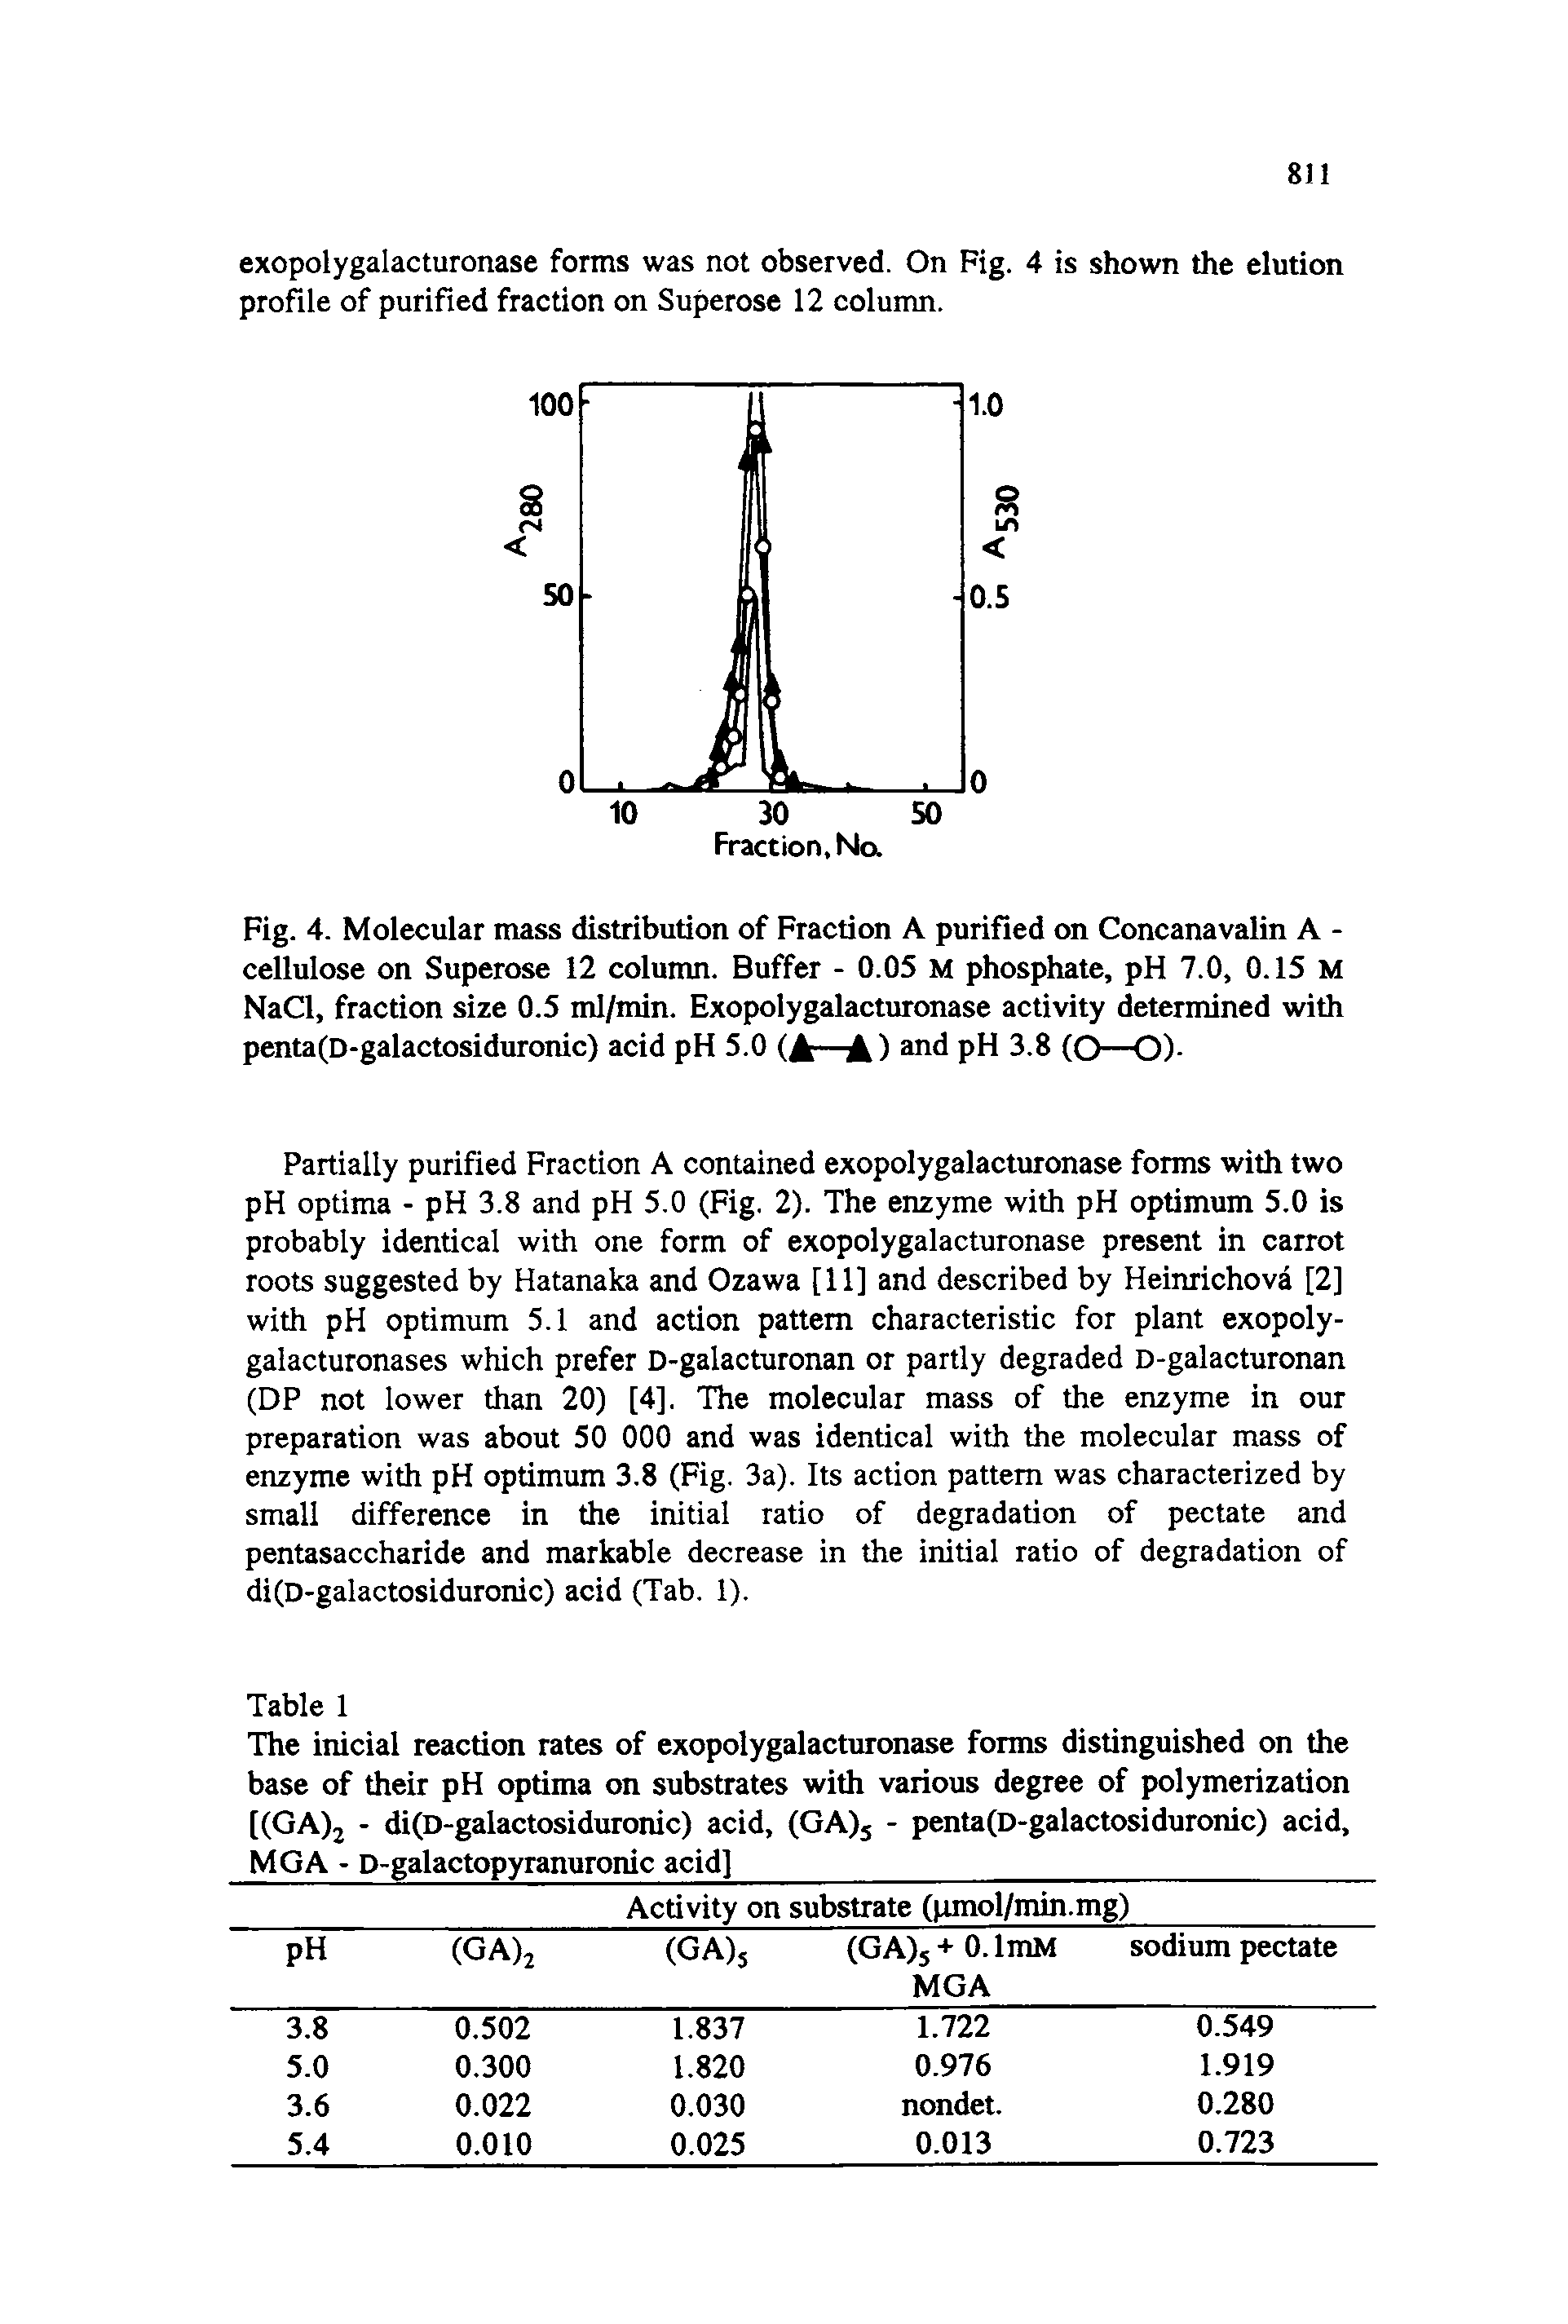 Fig. 4. Molecular mass distribution of Fraction A purified on Concanavalin A -cellulose on Superose 12 column. Buffer - 0.05 M phosphate, pH 7.0, 0.15 M NaCl, fraction size 0.5 ml/min. Exopolygalacturonase activity determined with penta(D-galactosiduronic) acid pH 5.0 and pH 3.8 (0—0)-...